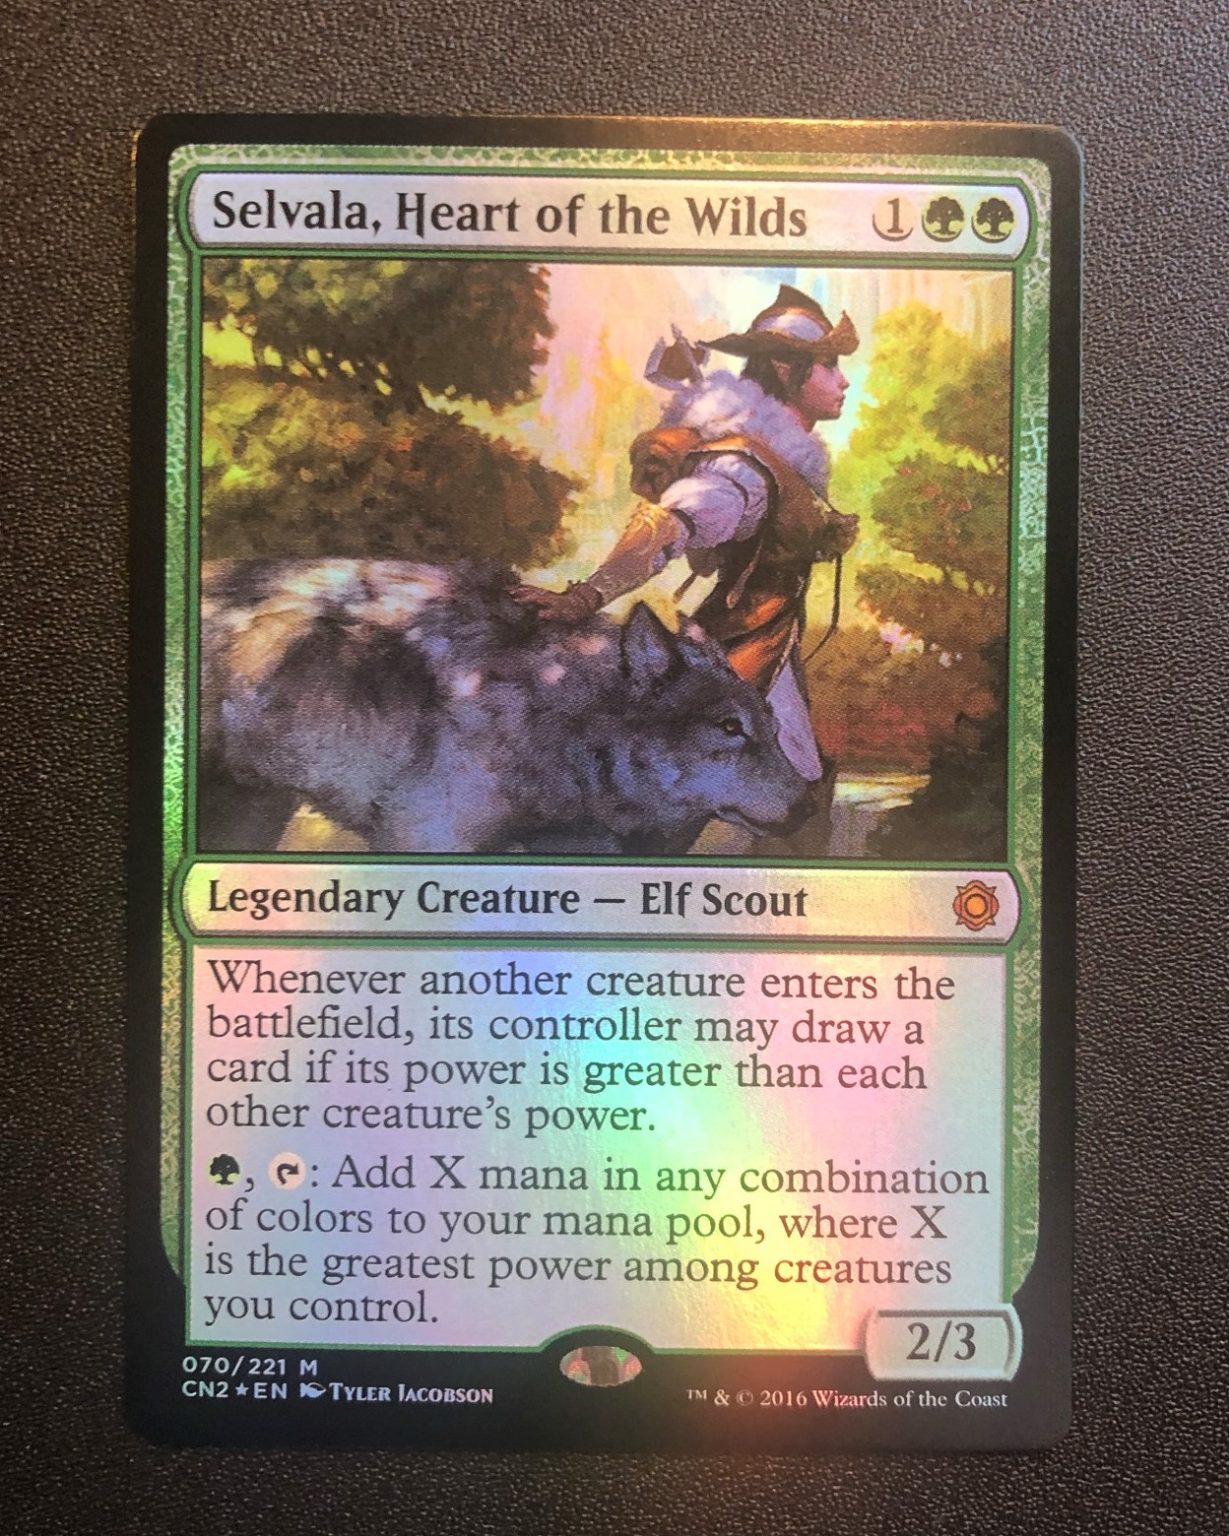 competitive selvala heart of the wilds edh